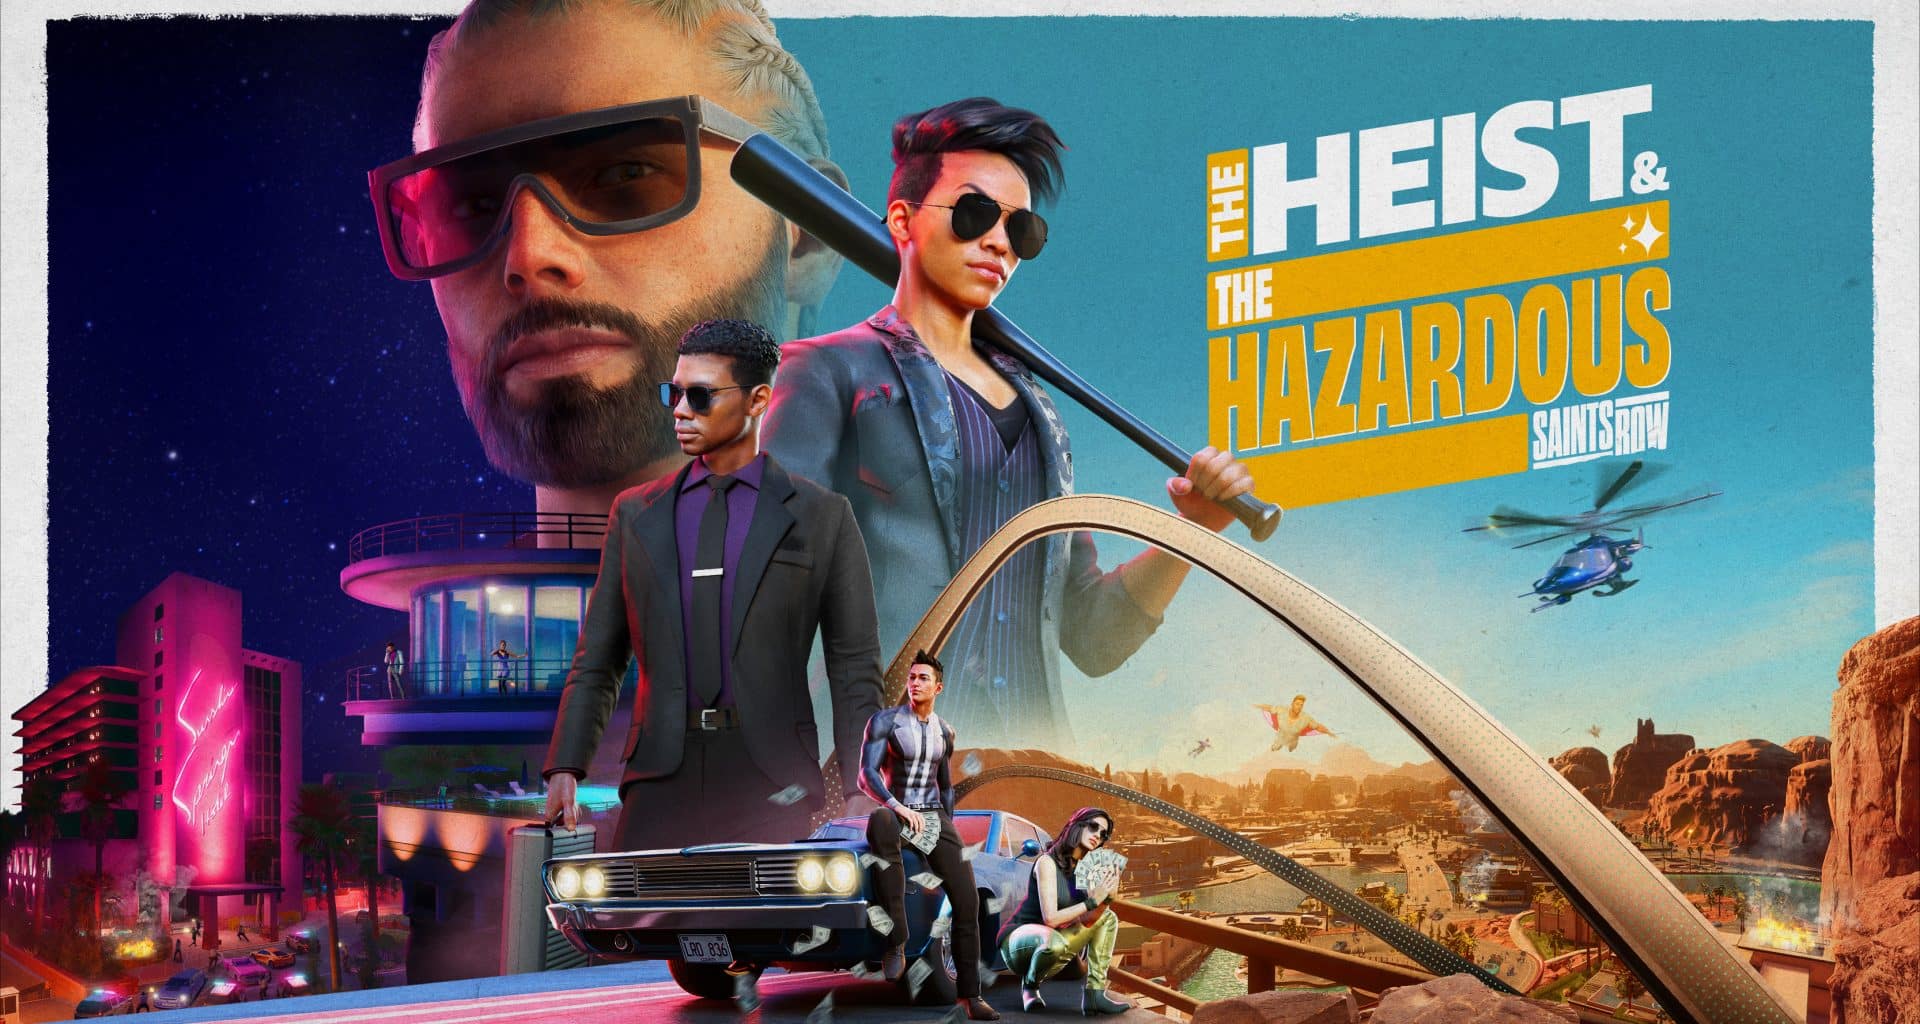 Saints Row The Heist and The Hazardous Expansion Releases May 9